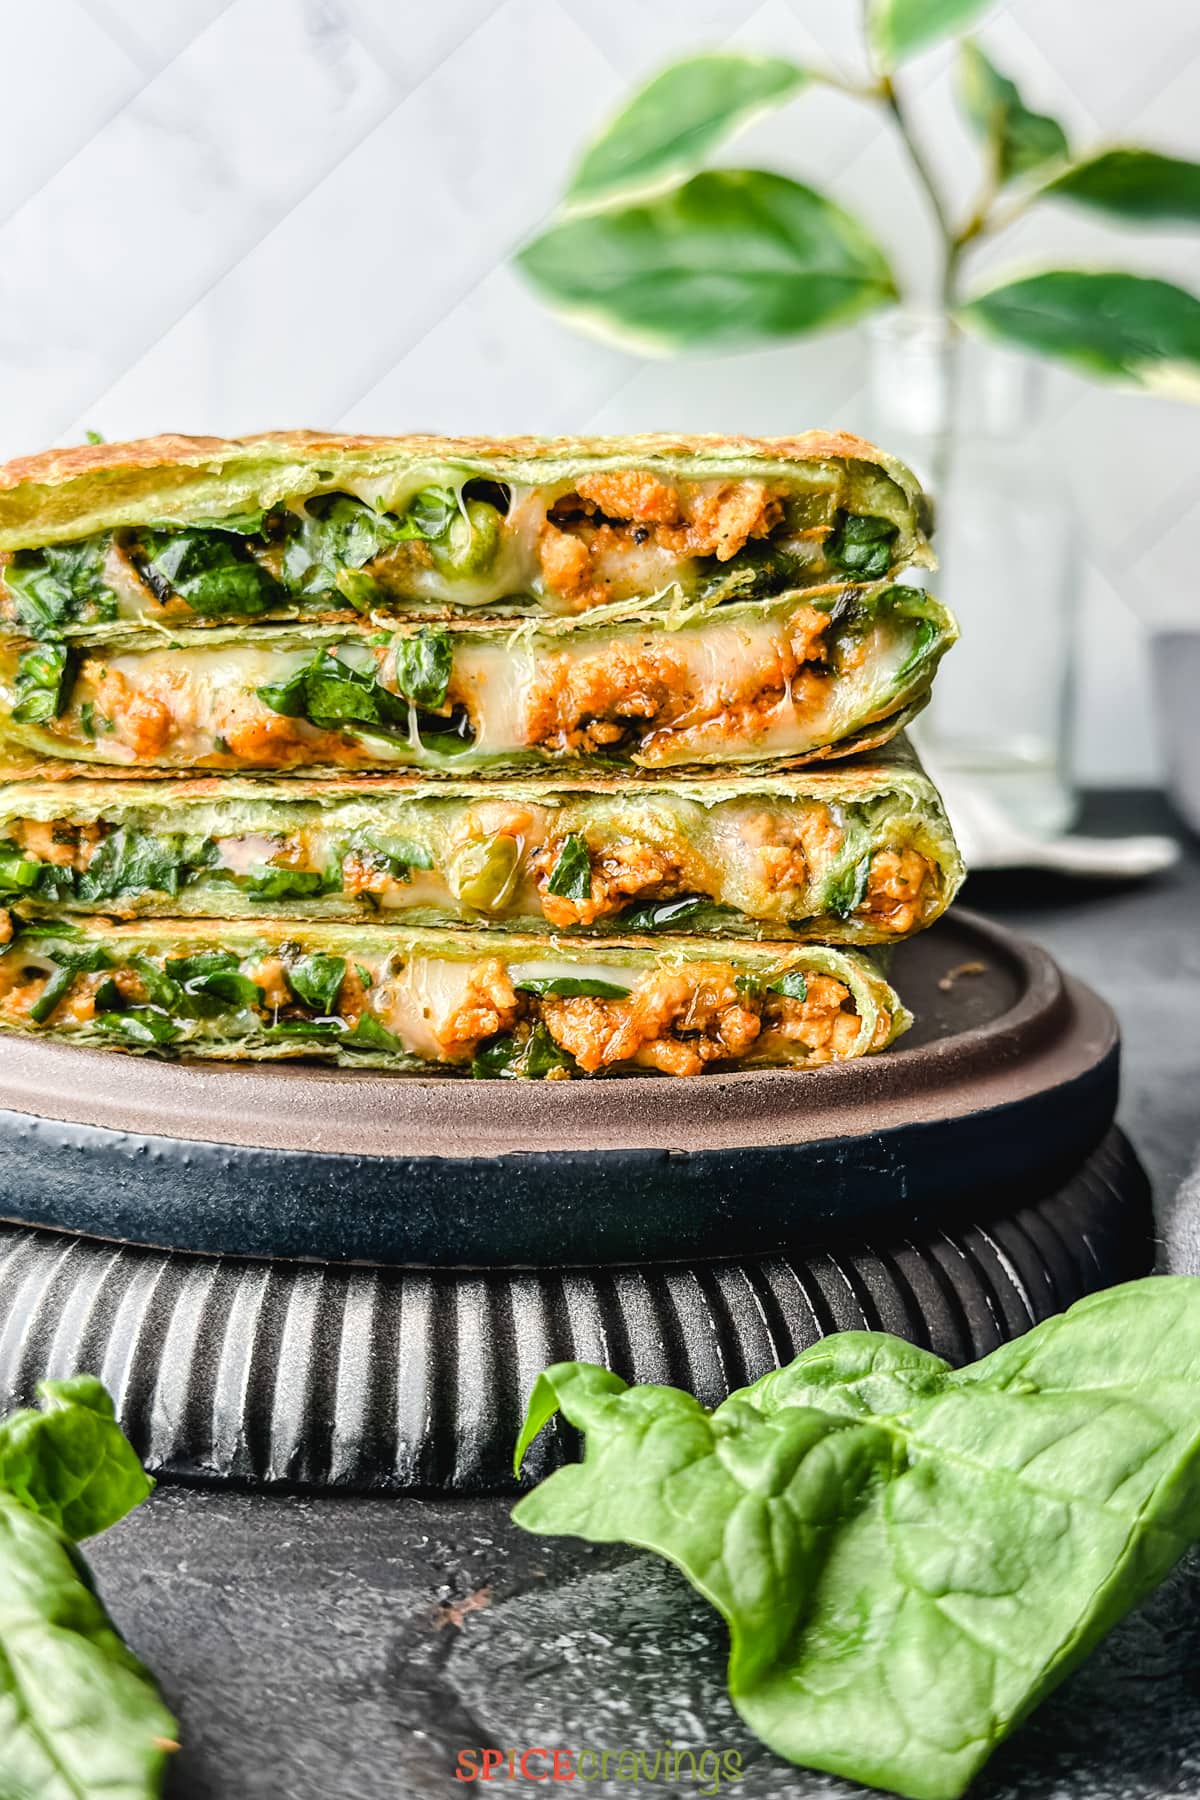 Stack of cheesy quesadillas with meat and spinach